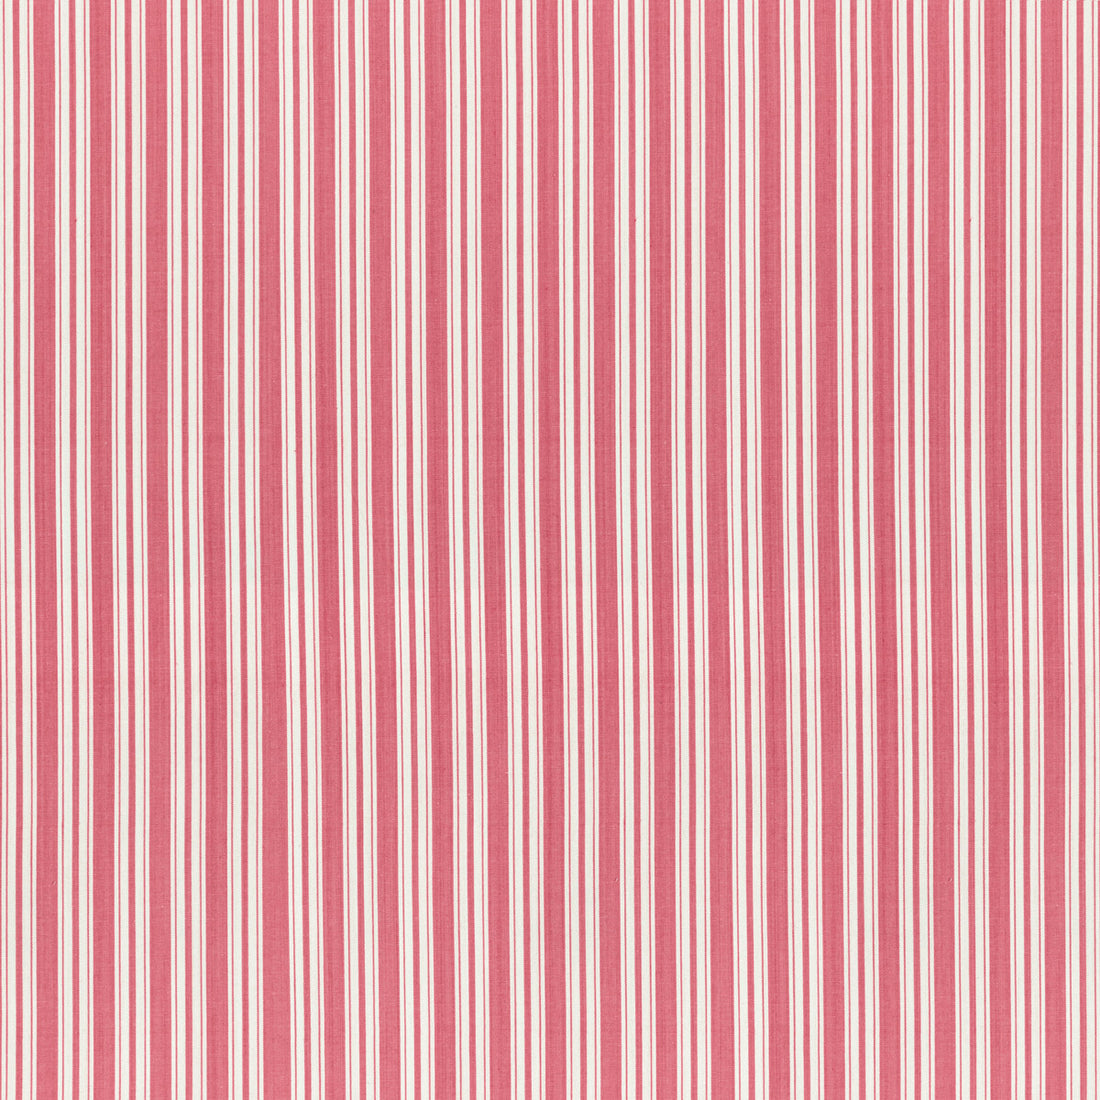 Selune Stripe fabric in rose color - pattern 8022118.7.0 - by Brunschwig &amp; Fils in the Normant Checks And Stripes II collection